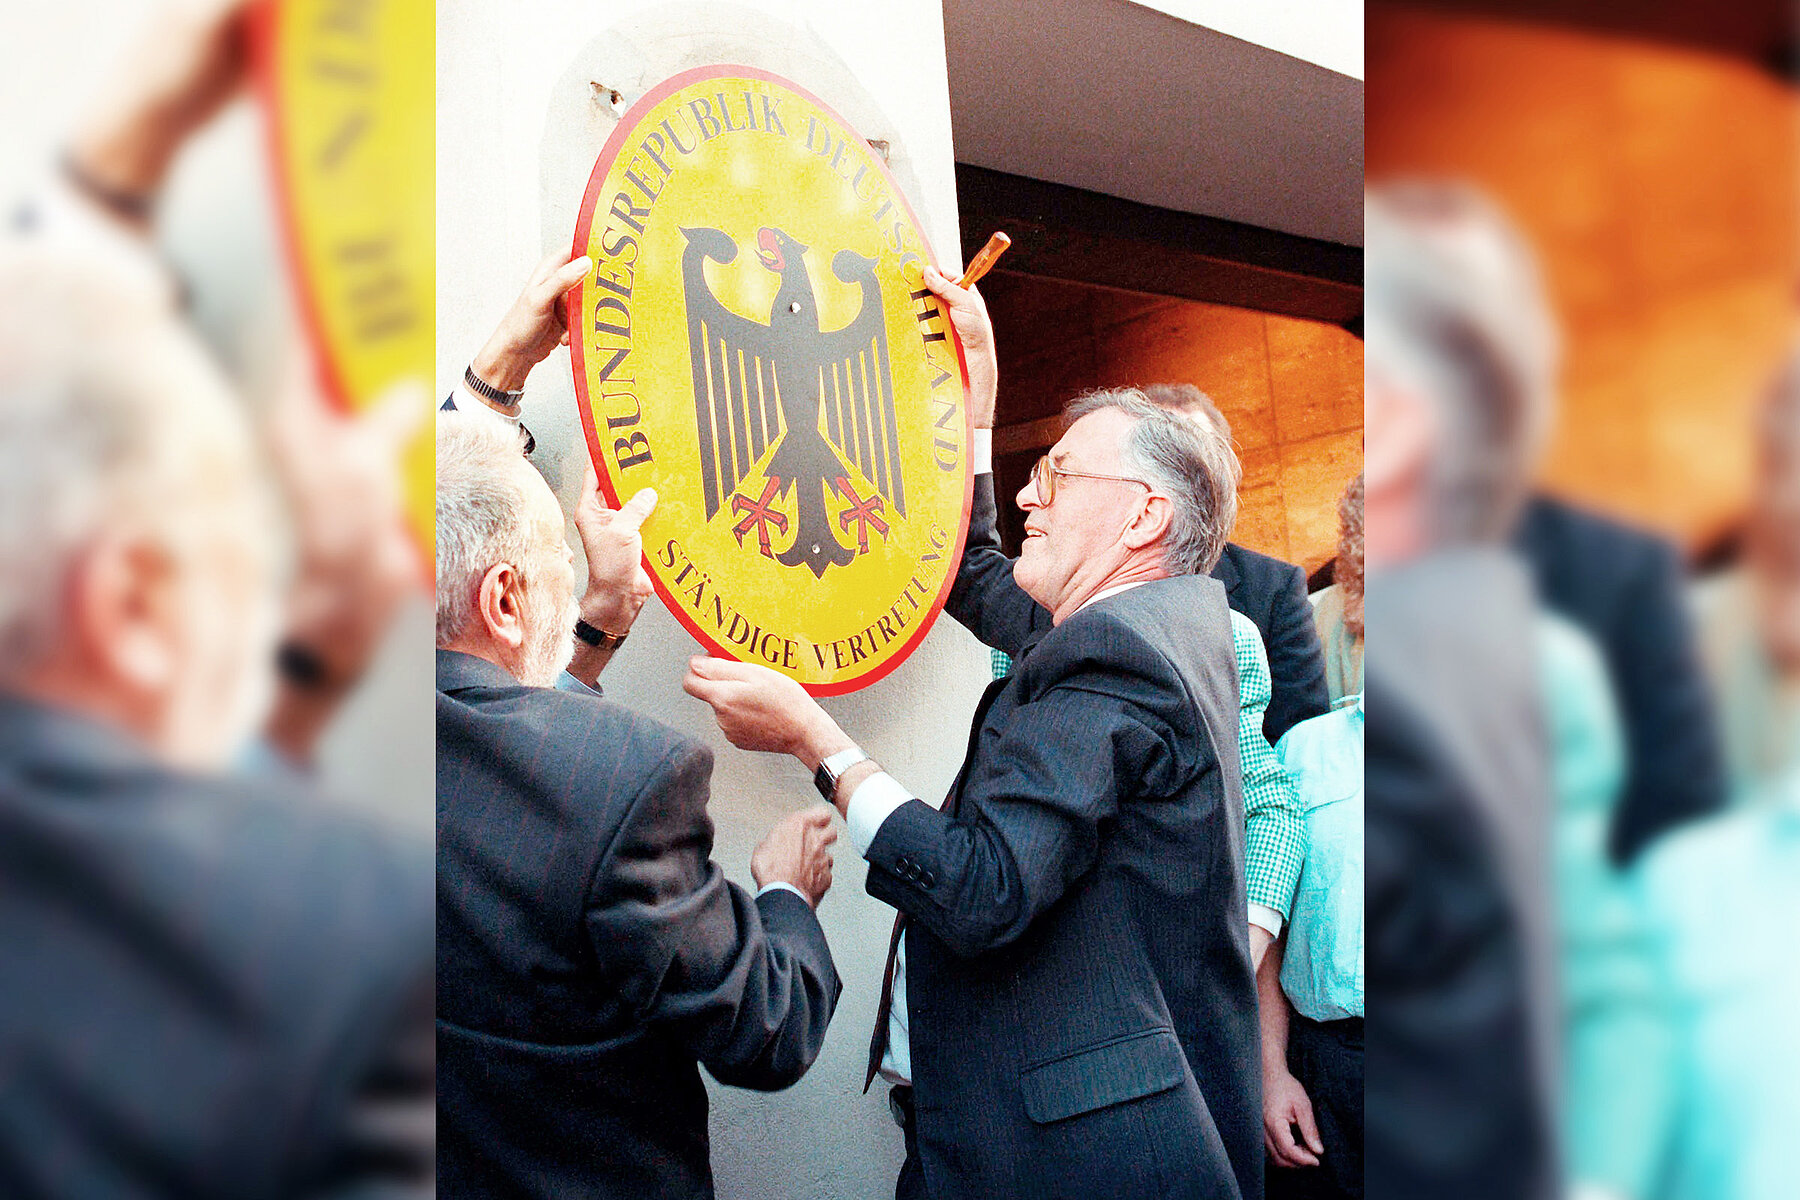 The head of the Ständige Vertretung and another man take down the official plaque with the black-red federal eagle on a yellow background.